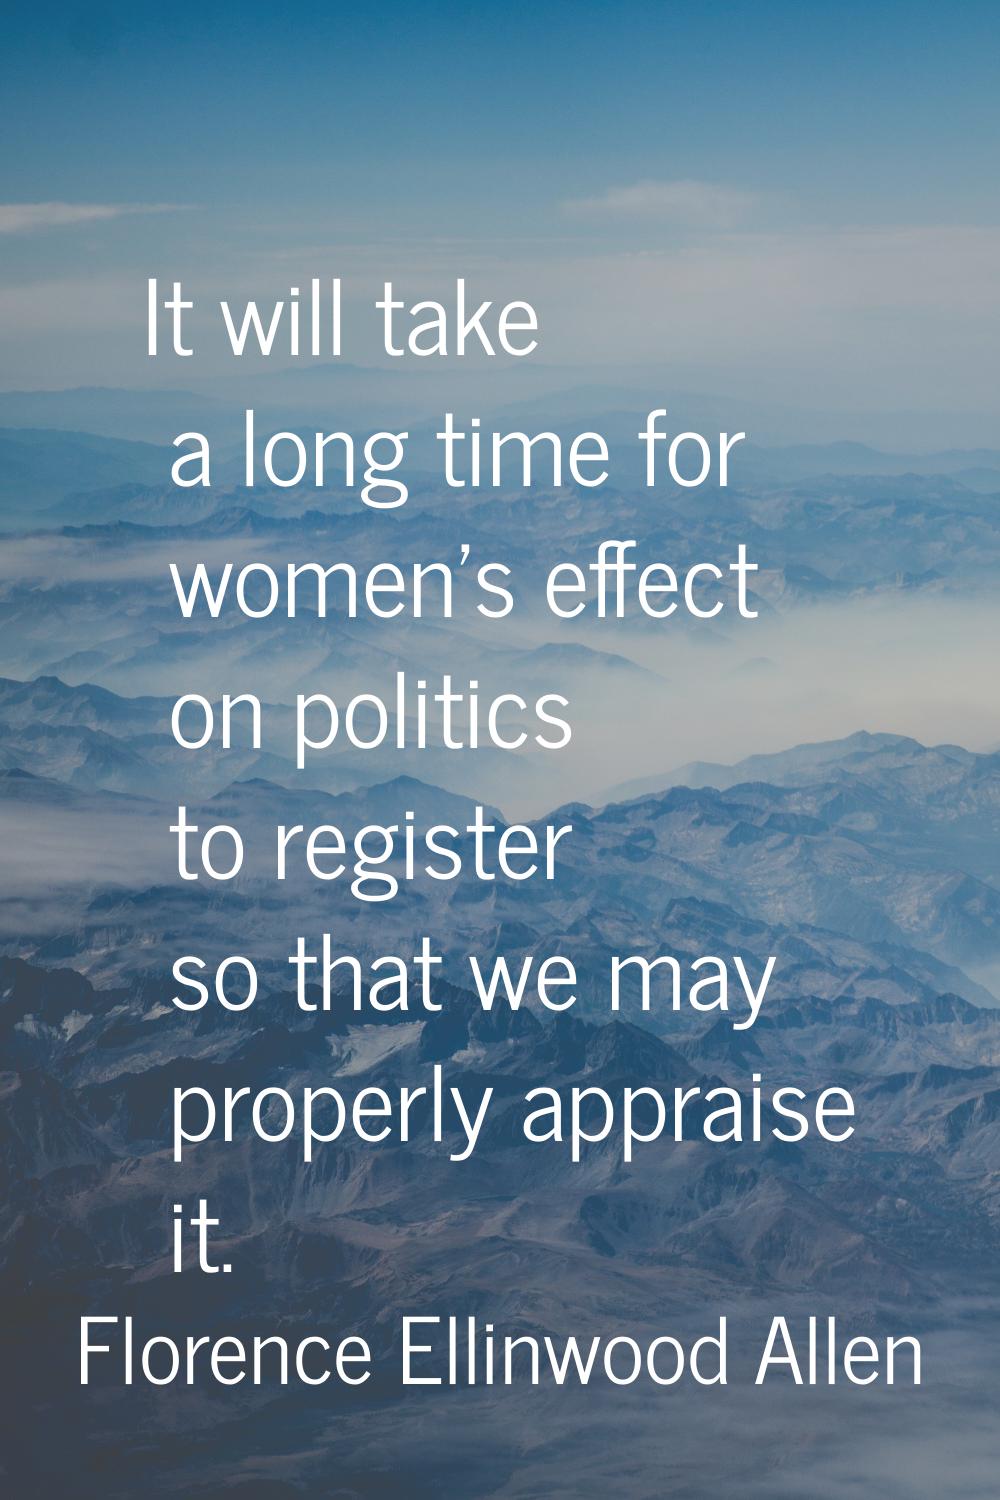 It will take a long time for women's effect on politics to register so that we may properly apprais